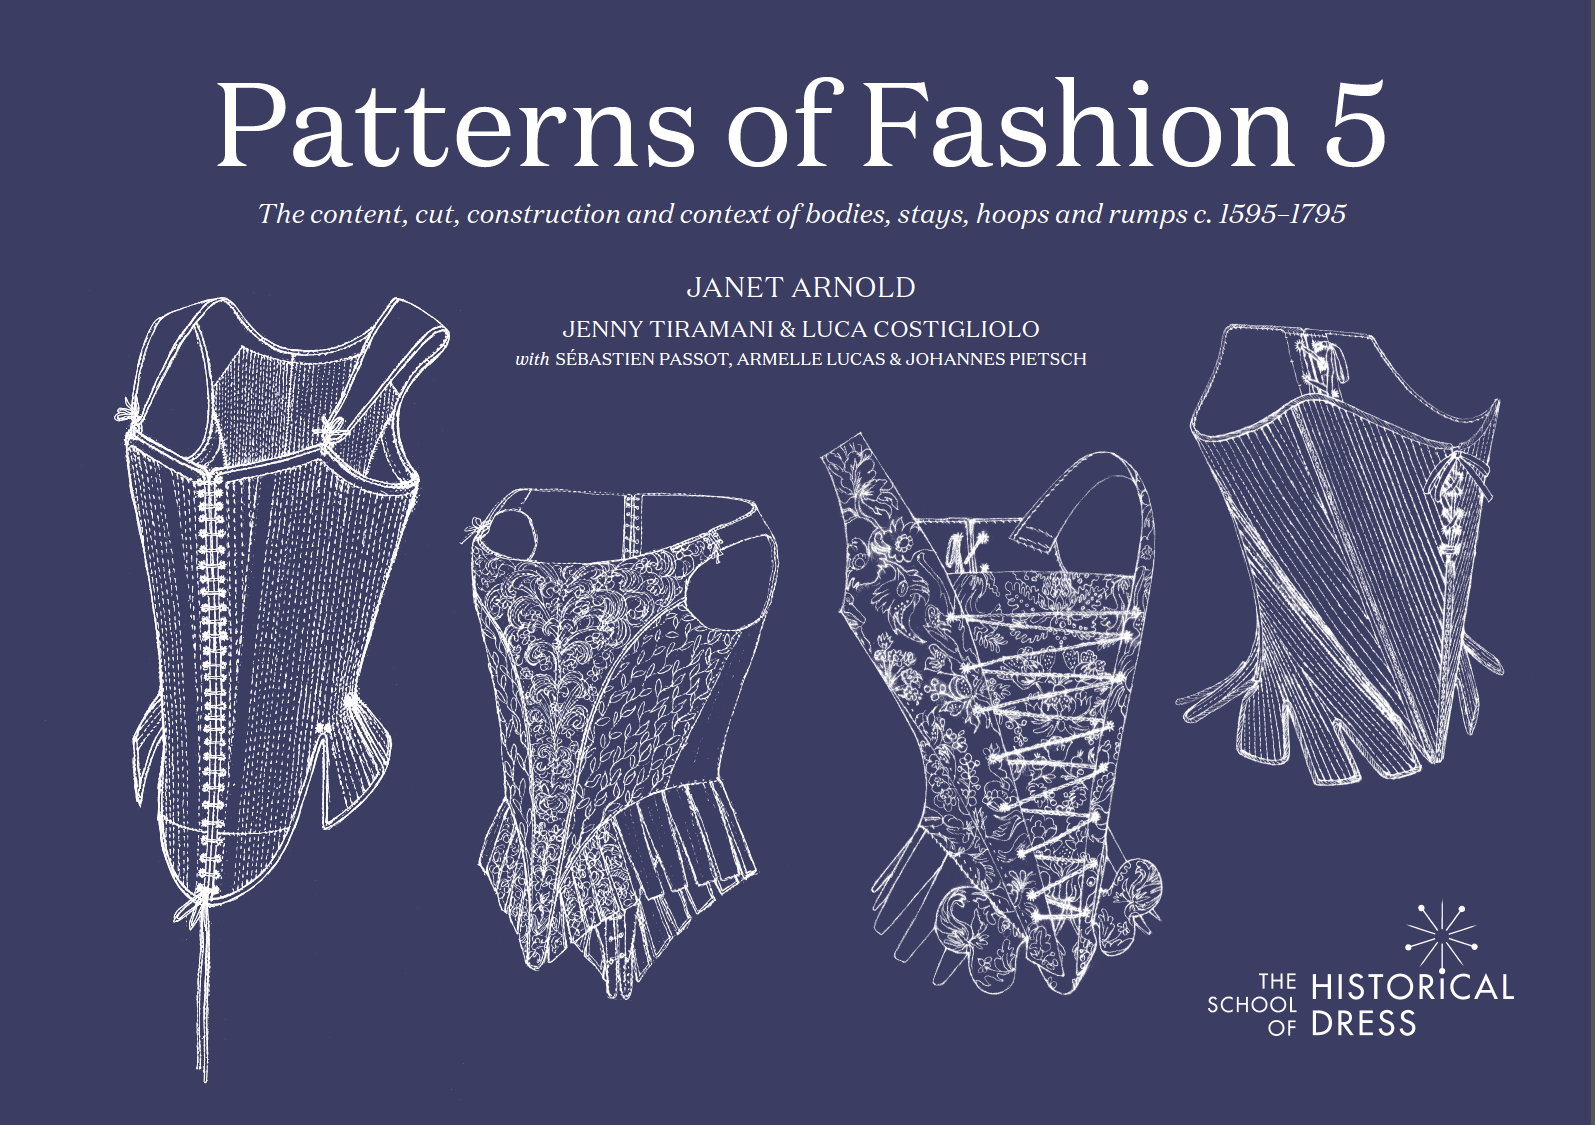 You SEW Girl: Everlasting patterns fashion industry-style!